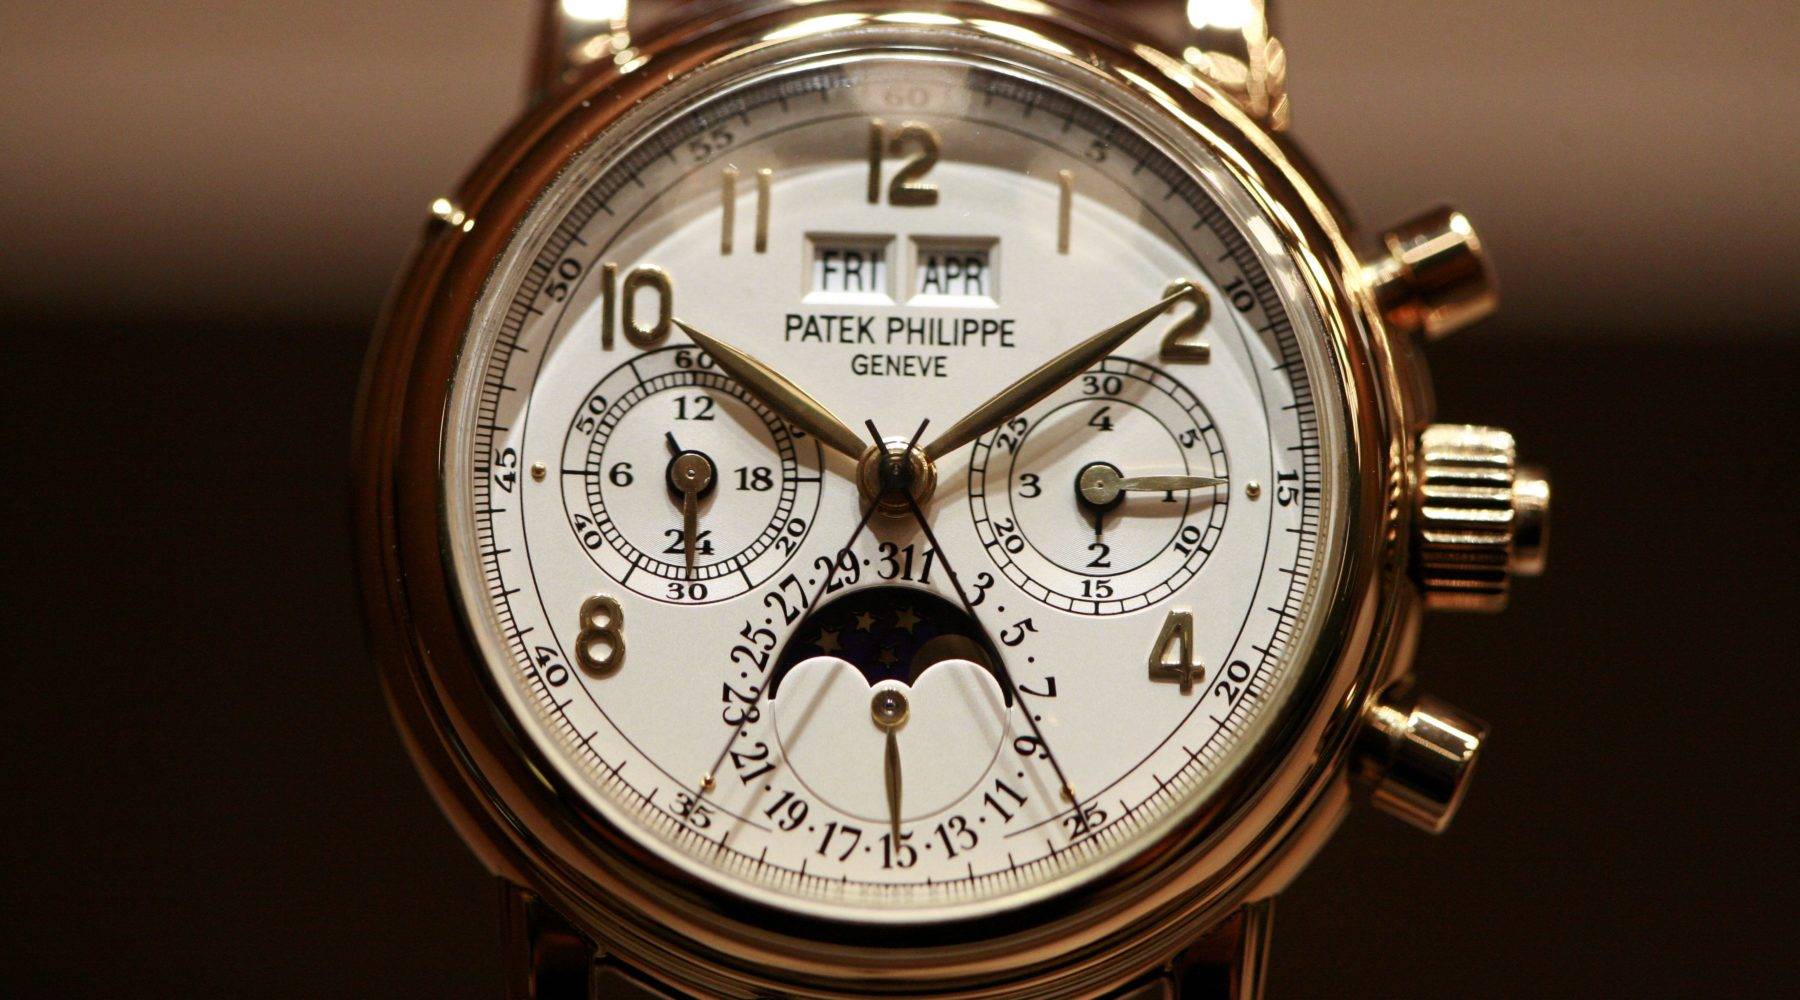 Patek Philippe Lowers Retail Prices as CHF explosion hits